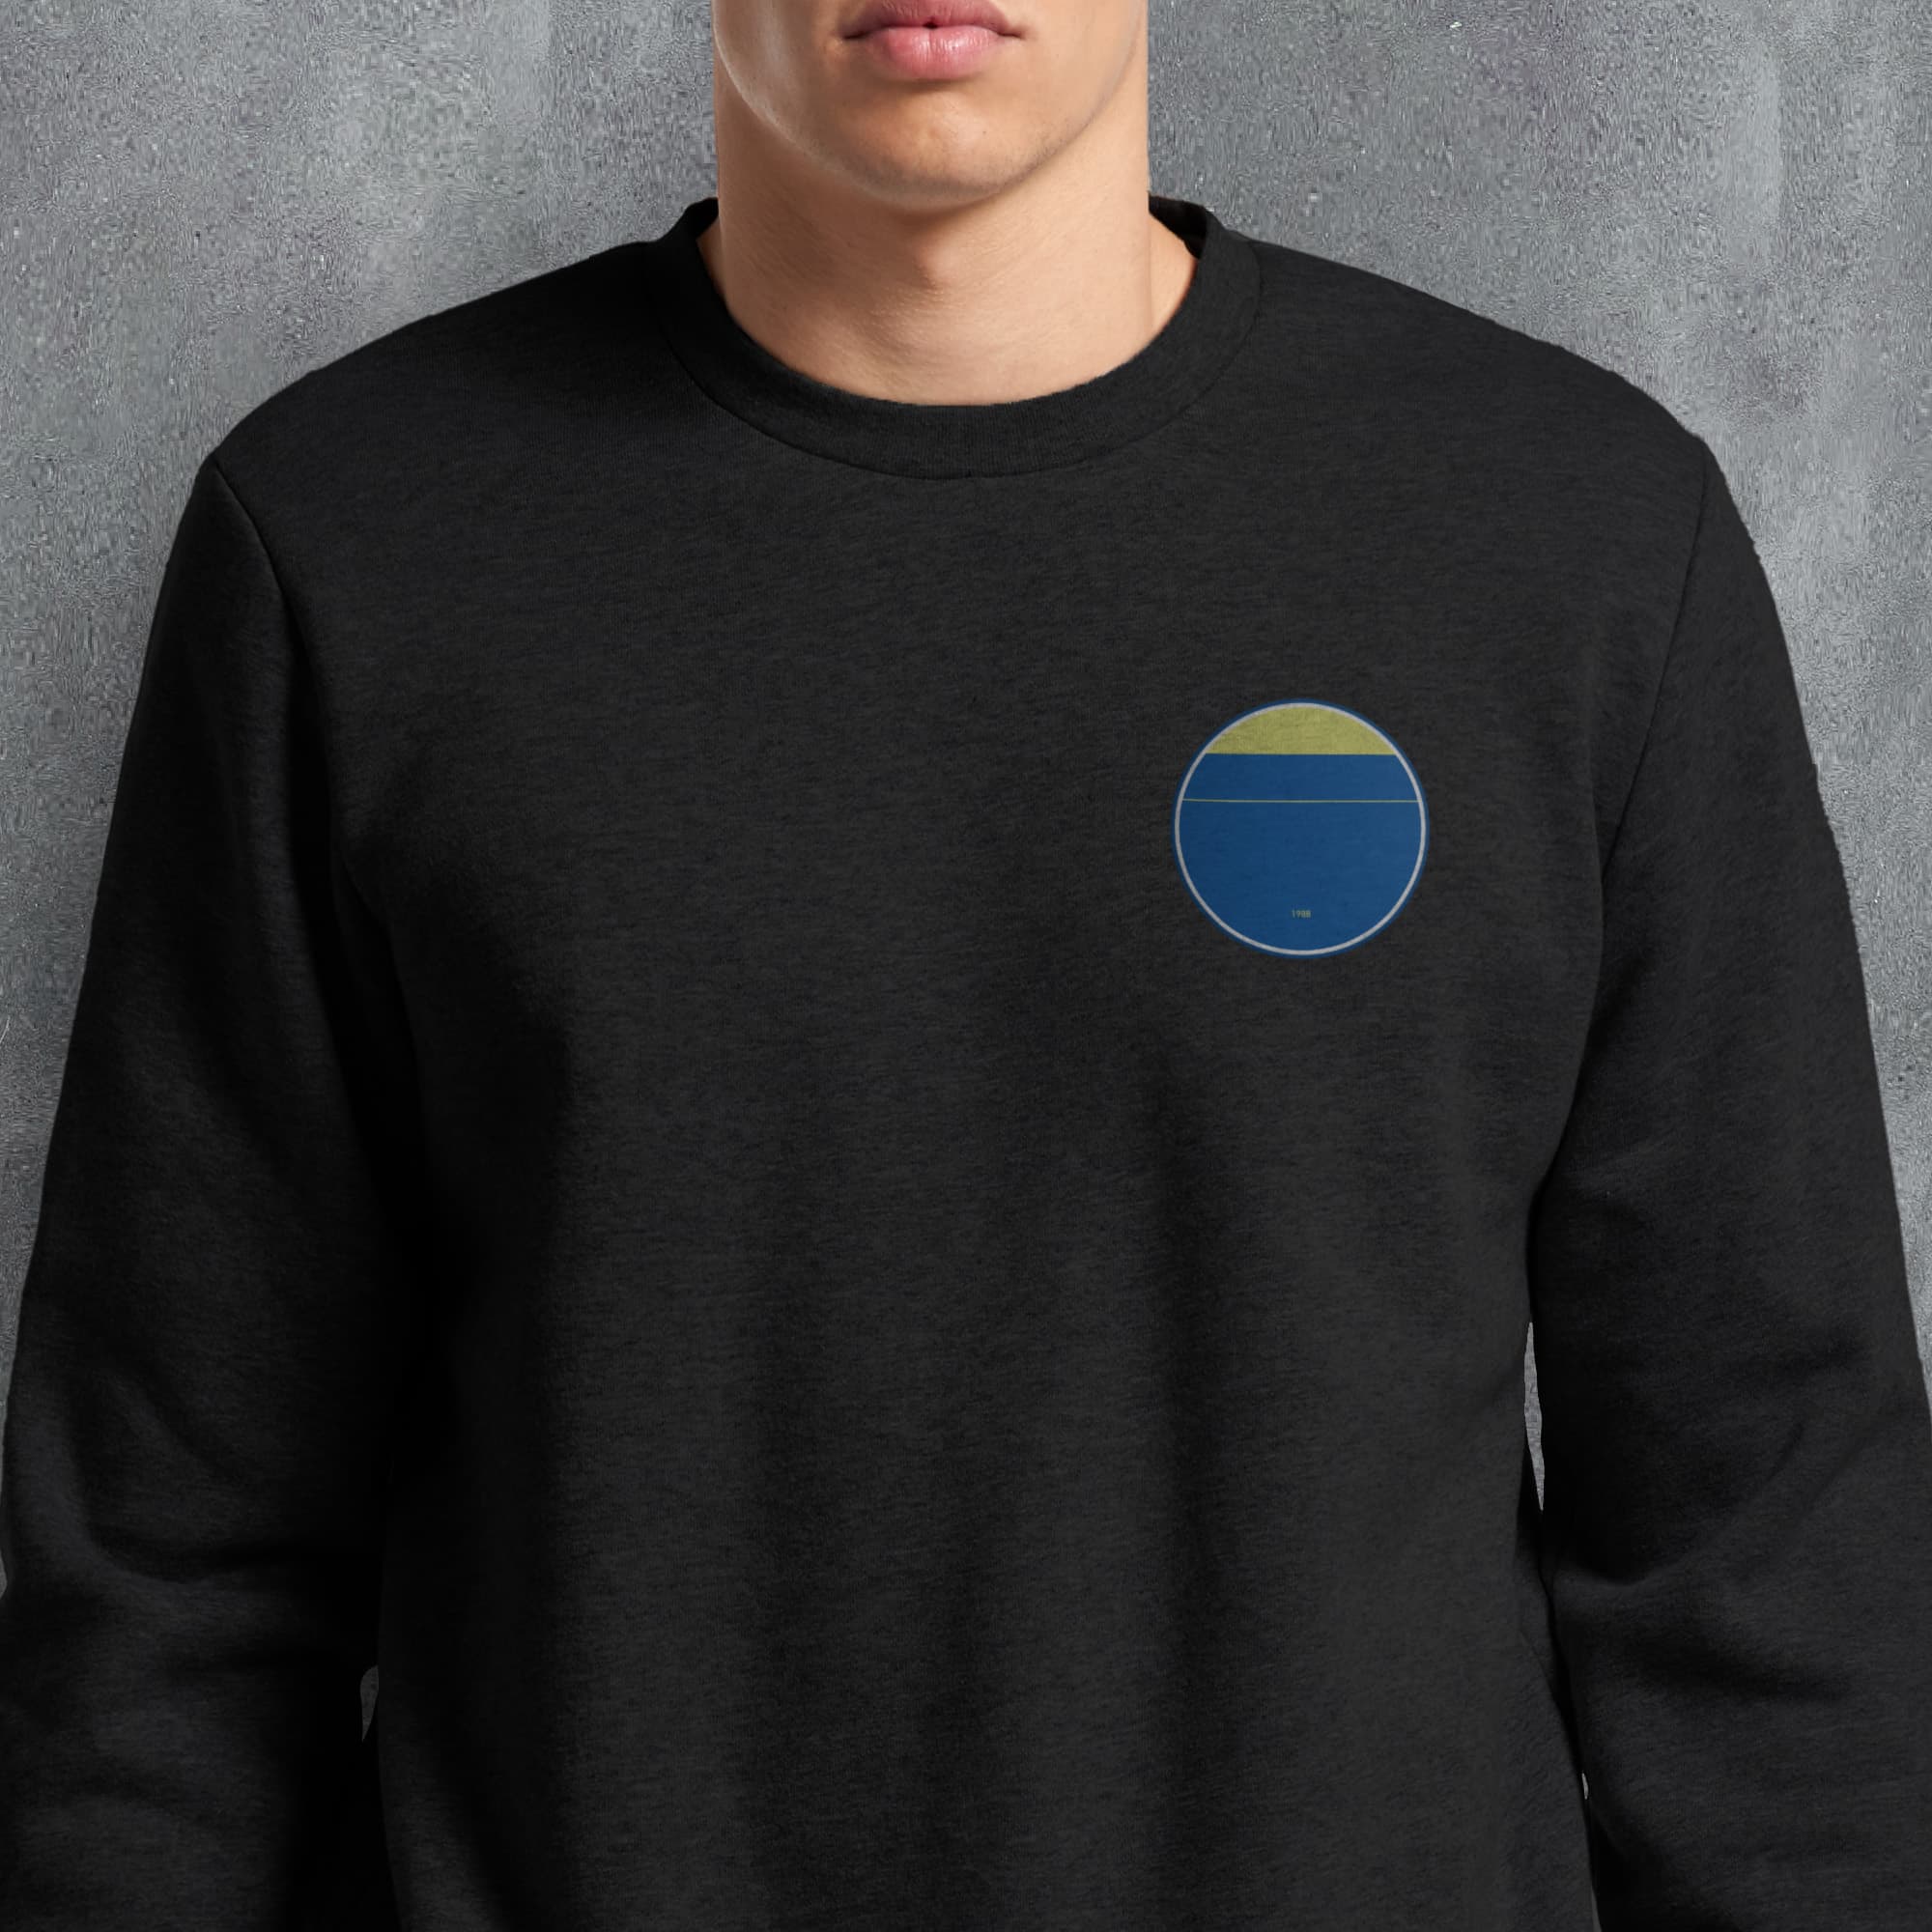 a man wearing a black sweatshirt with a blue and yellow circle on it